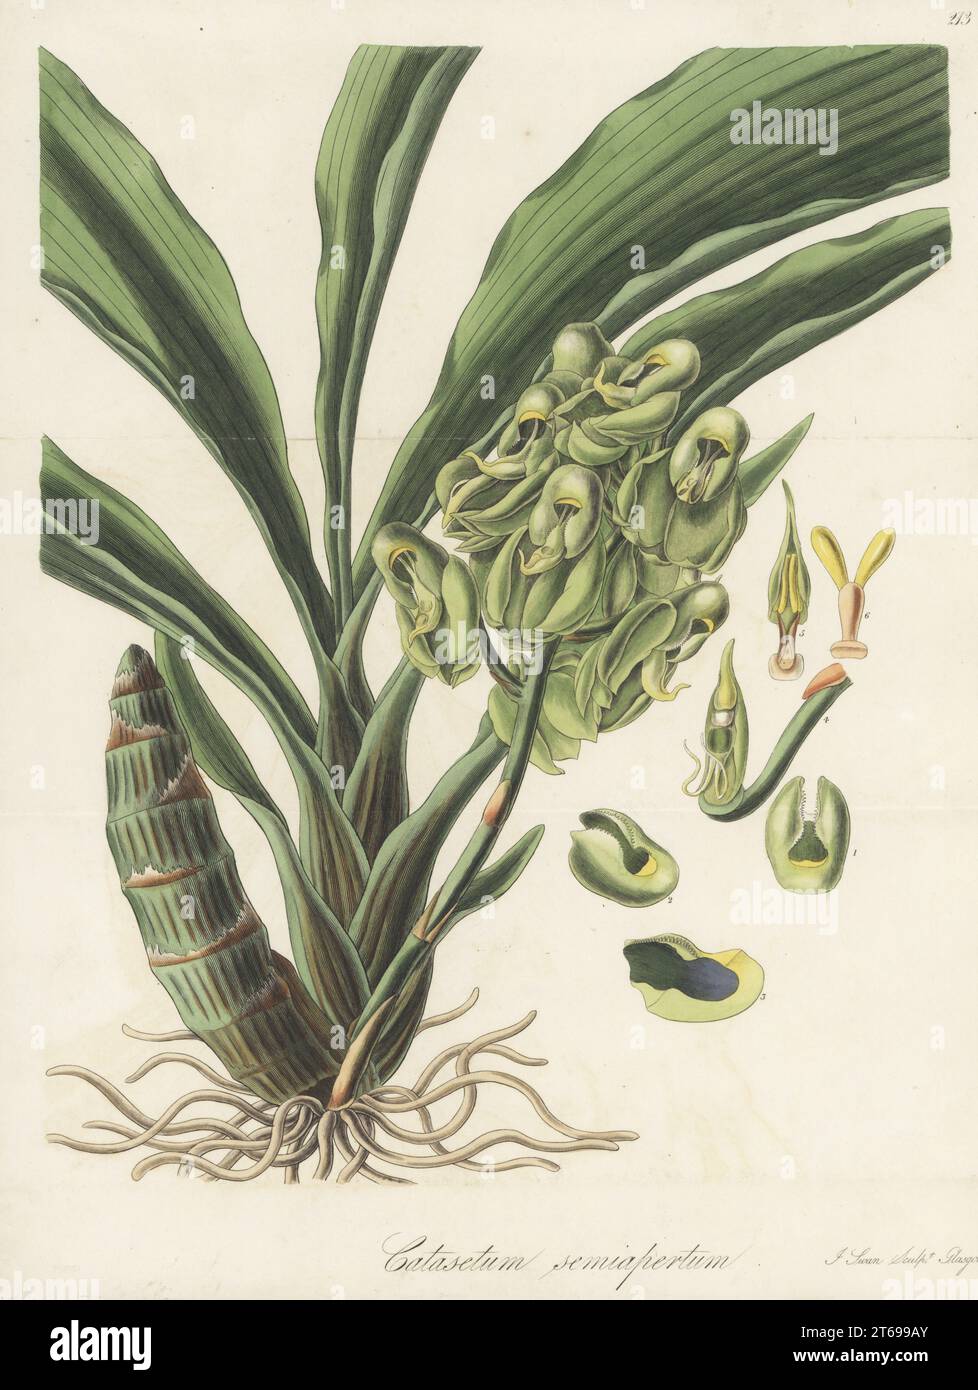 One-colored catasetum orchid, Catasetum purum. Native to Brazil, plants sent by Bell Edward Lloyd to Miss P. S. Falkner of Fairfield. Greenish-flowered catasetum, Catasetum semiapertum. Handcoloured copperplate engraving by Joseph Swan after a botanical illustration by William Jackson Hooker from his Exotic Flora, William Blackwood, Edinburgh, 1827. Stock Photo